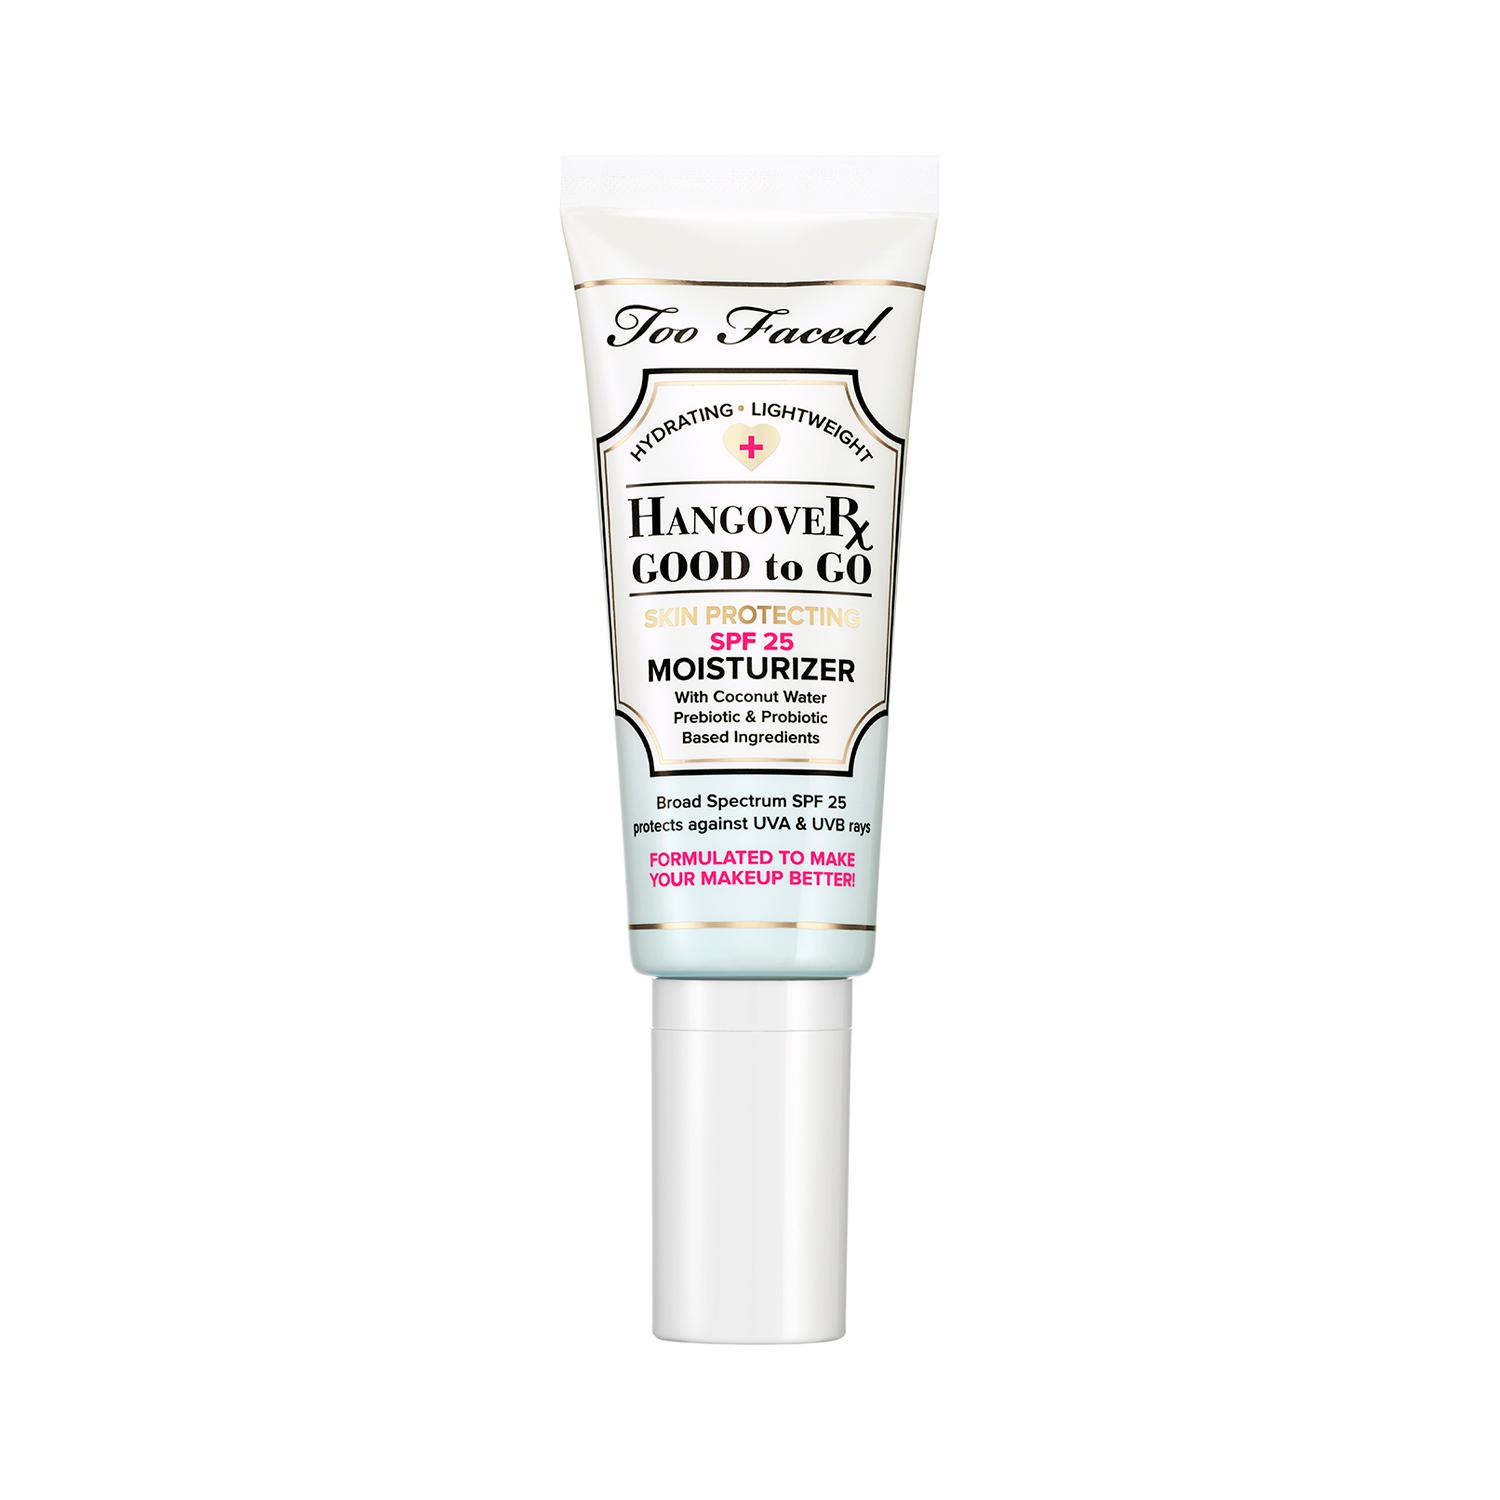 Too Faced Hangover Good To Go Skin Protecting Moisturizer SPF 25 (40ml)